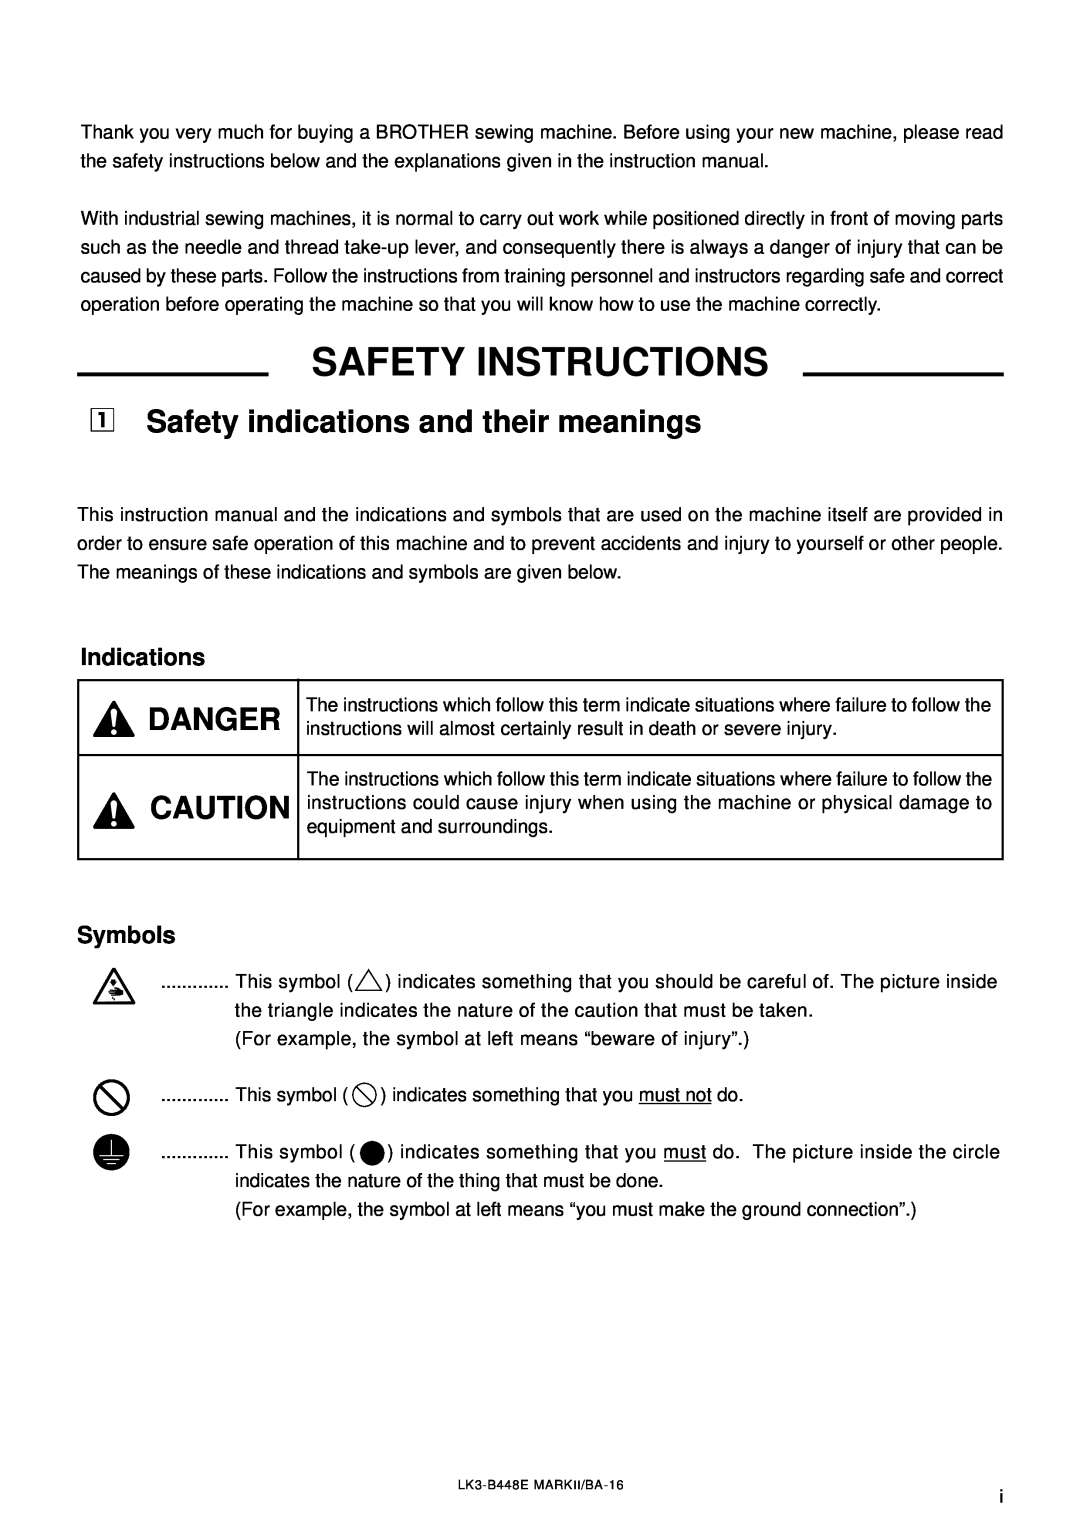 Brother LK3-B448E z Safety indications and their meanings, Danger, Indications, Symbols, Safety Instructions 